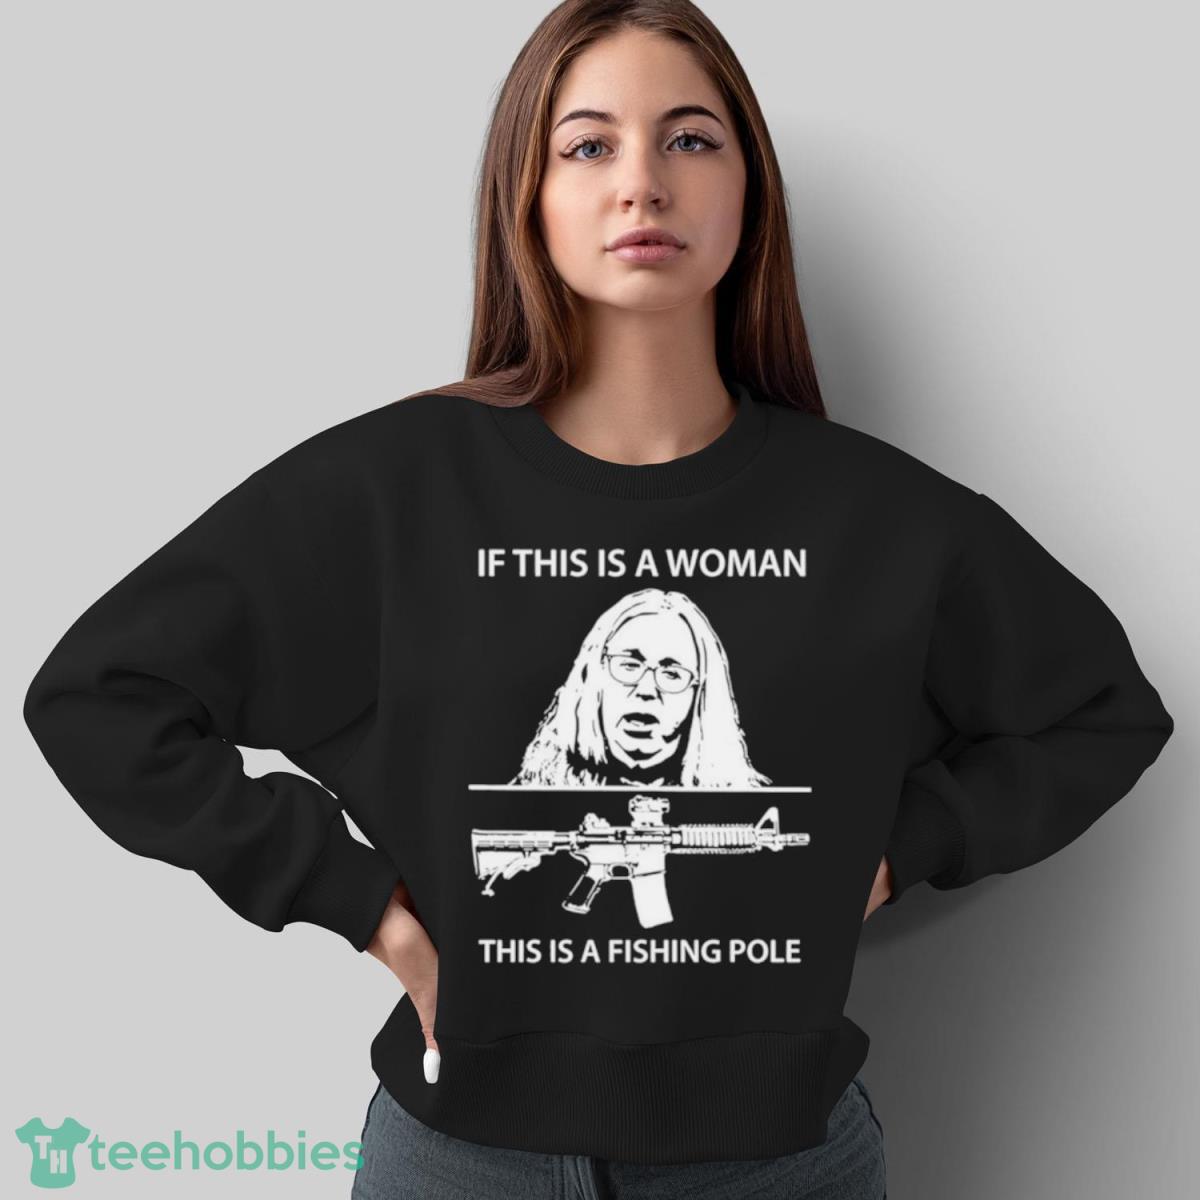 https://image.teehobbies.us/2023-07/if-this-is-a-woman-this-is-a-fishing-pole-shirt-4.jpg